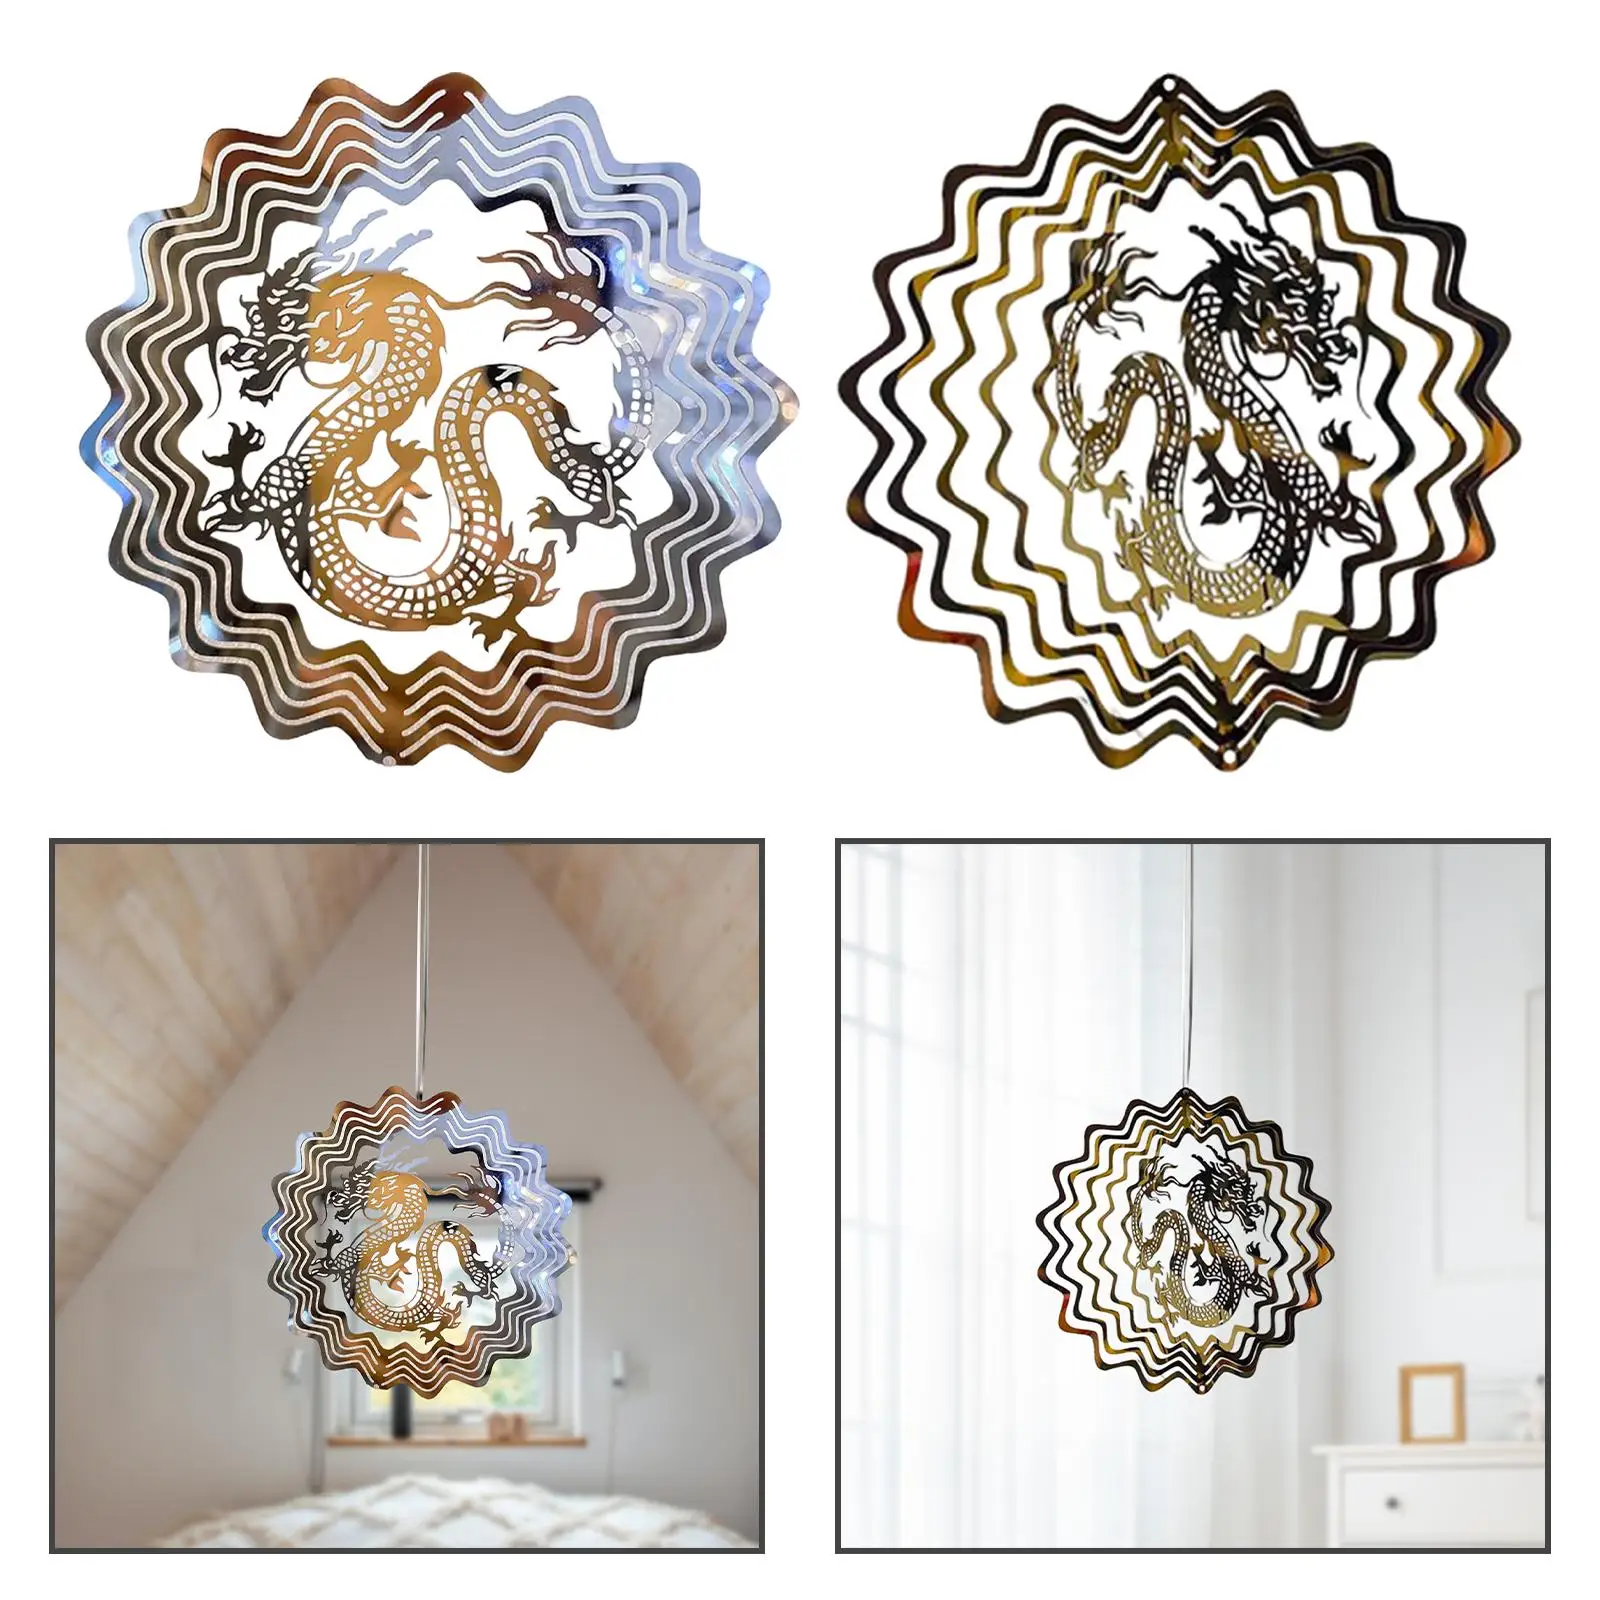 Dragon Wind Spinner Stainless Steel Rotating Ornaments for Yard Balcony Wall